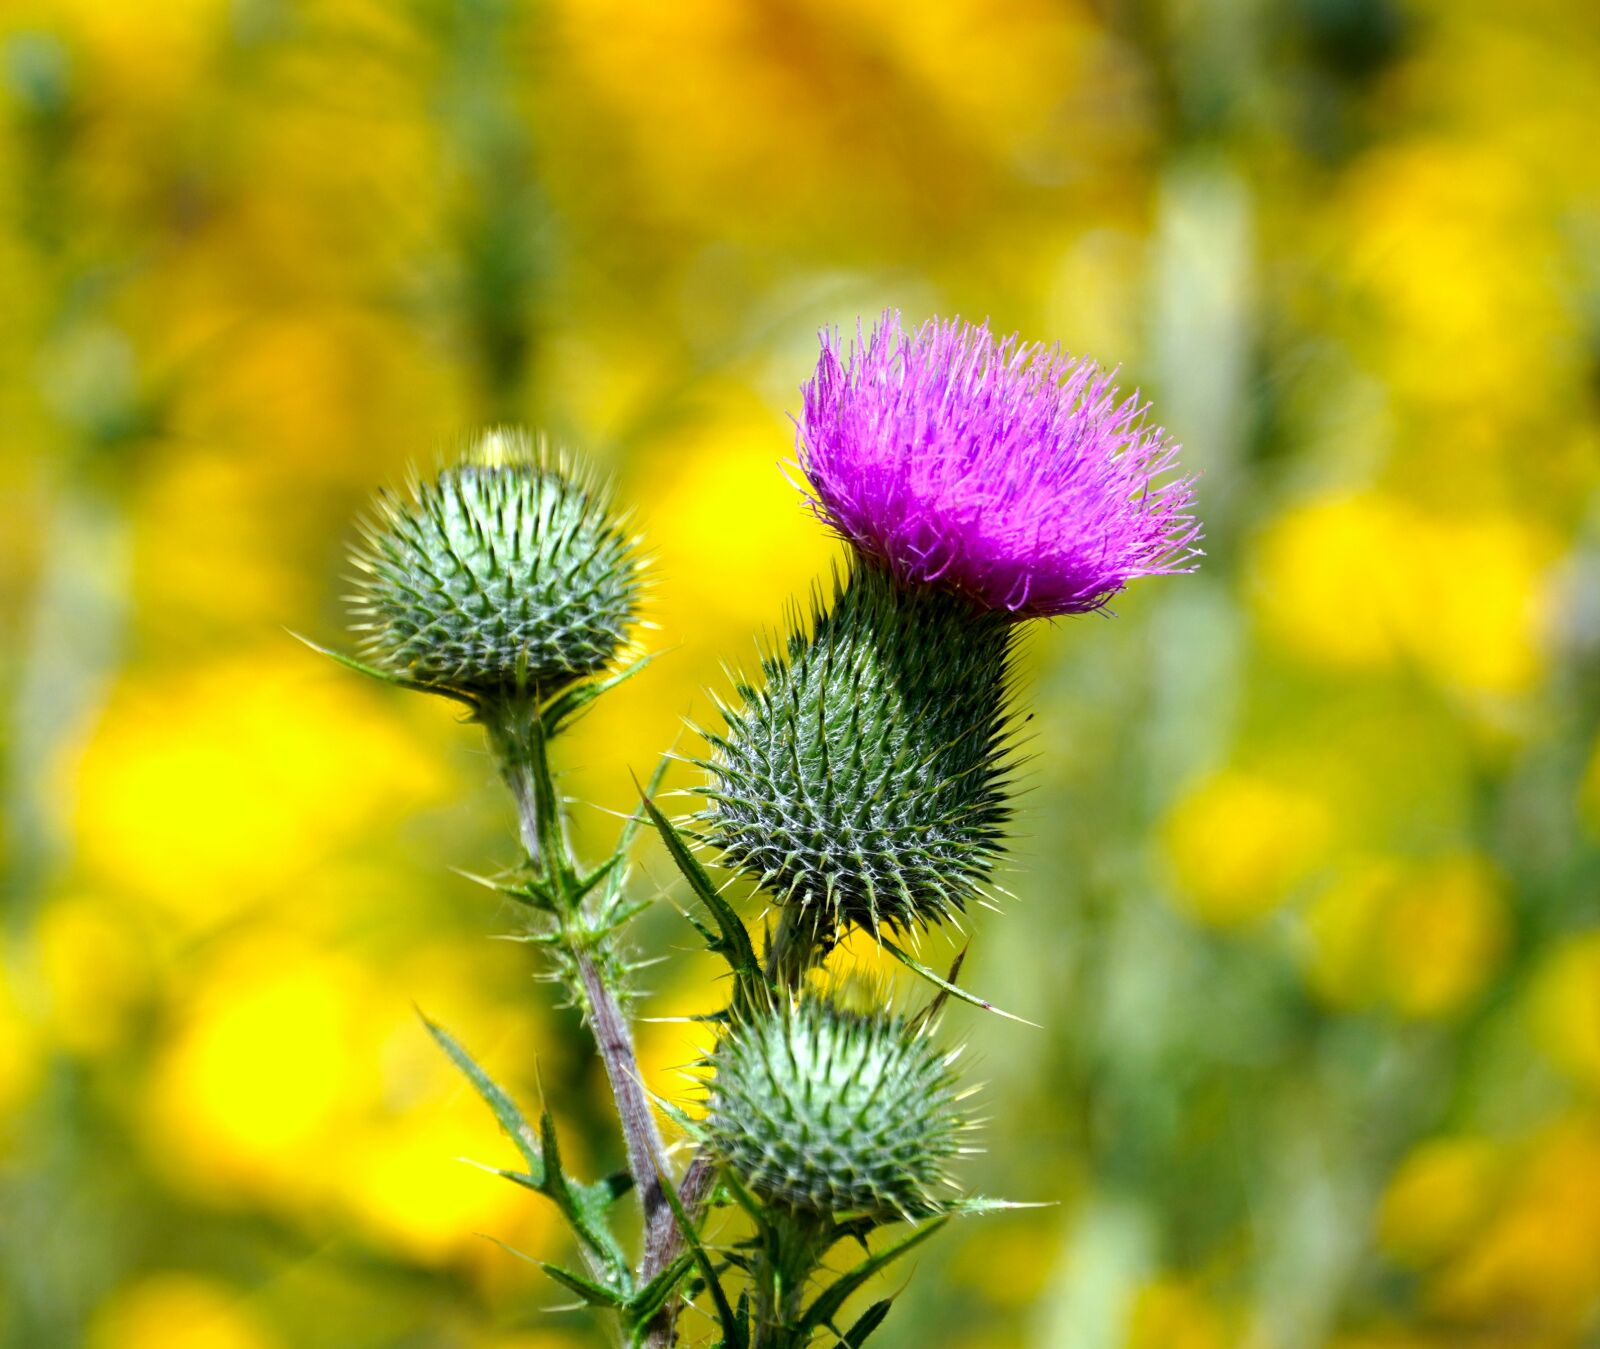 Sony a6400 sample photo. Thistle, blossom, bloom photography